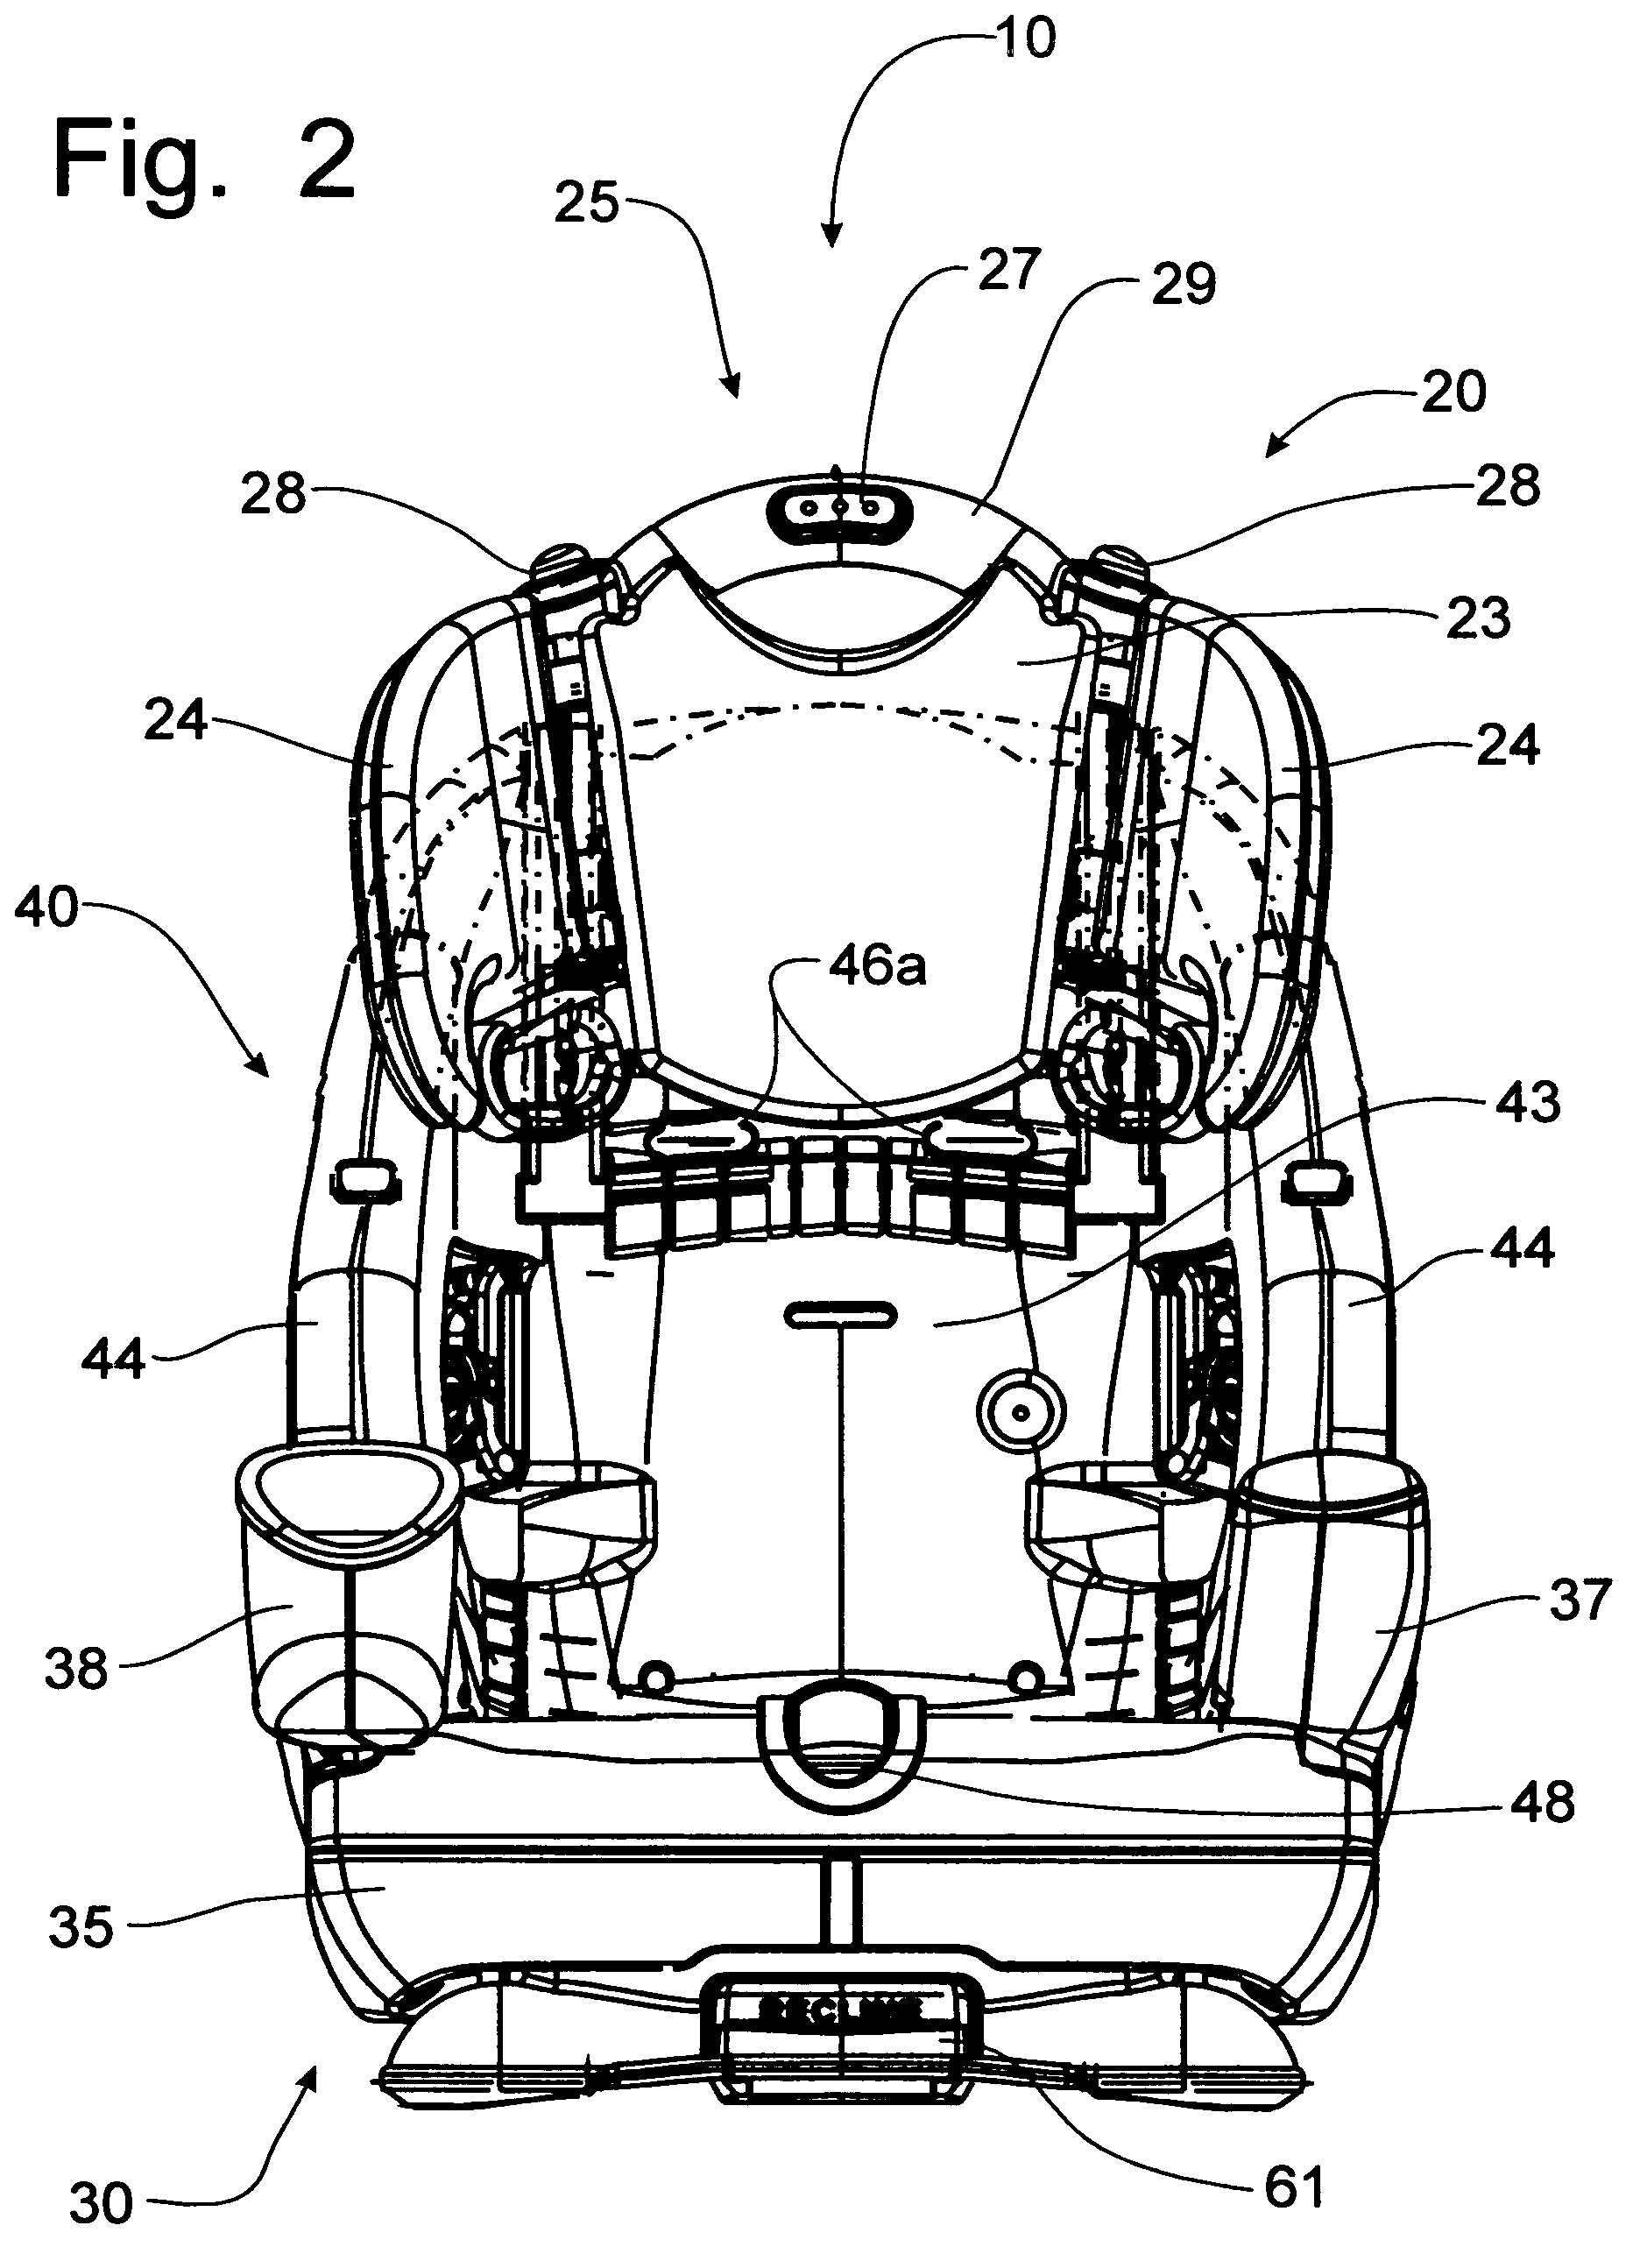 Child car seat with multiple use configurations